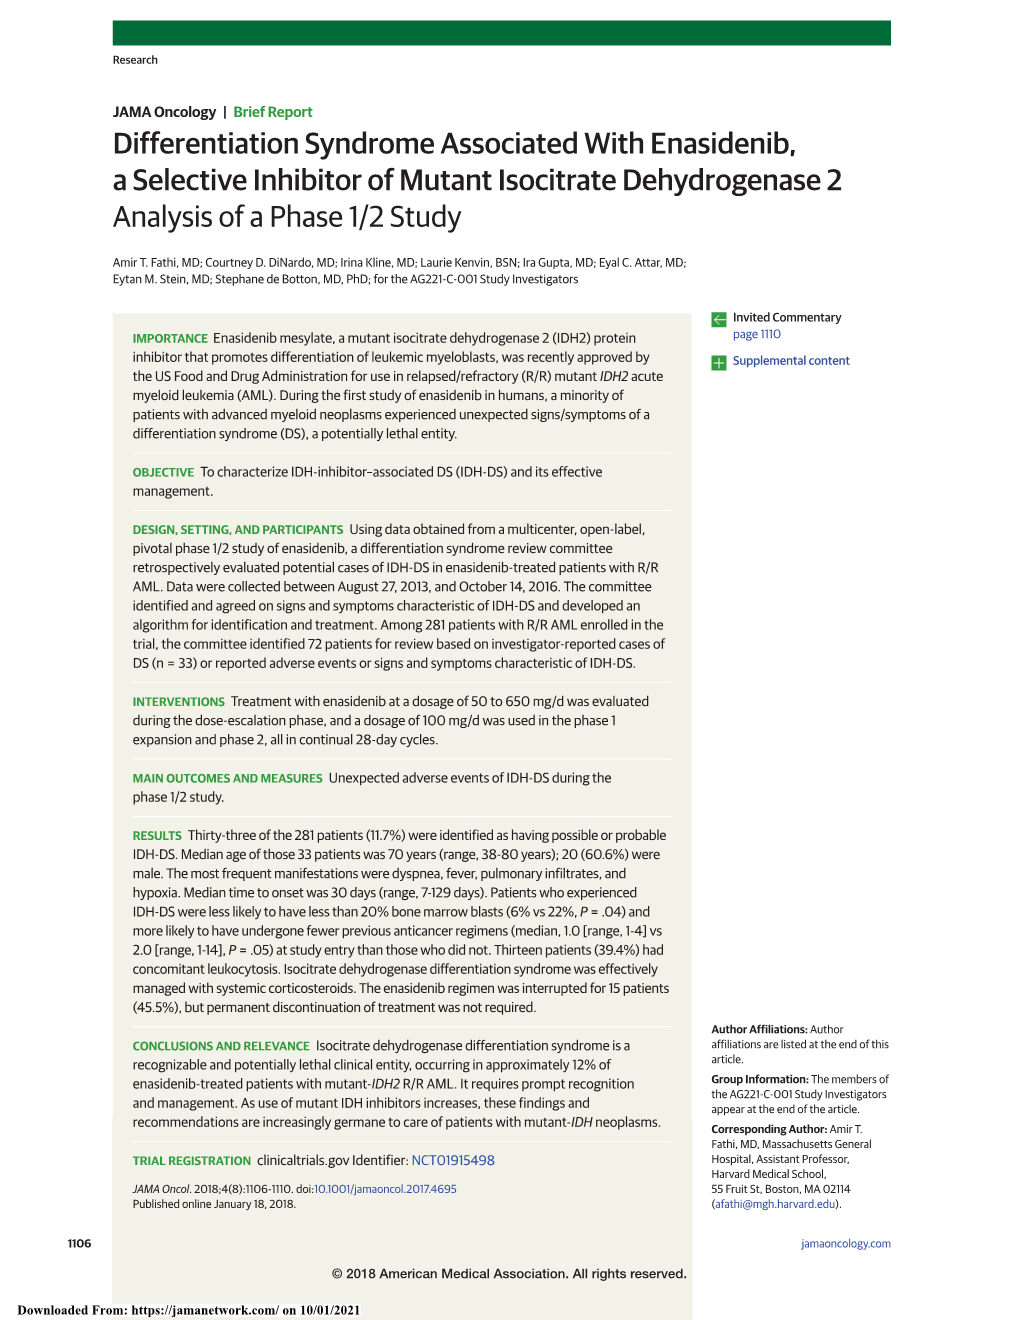 Differentiation Syndrome Associated with Enasidenib, a Selective Inhibitor of Mutant Isocitrate Dehydrogenase 2 Analysis of a Phase 1/2 Study